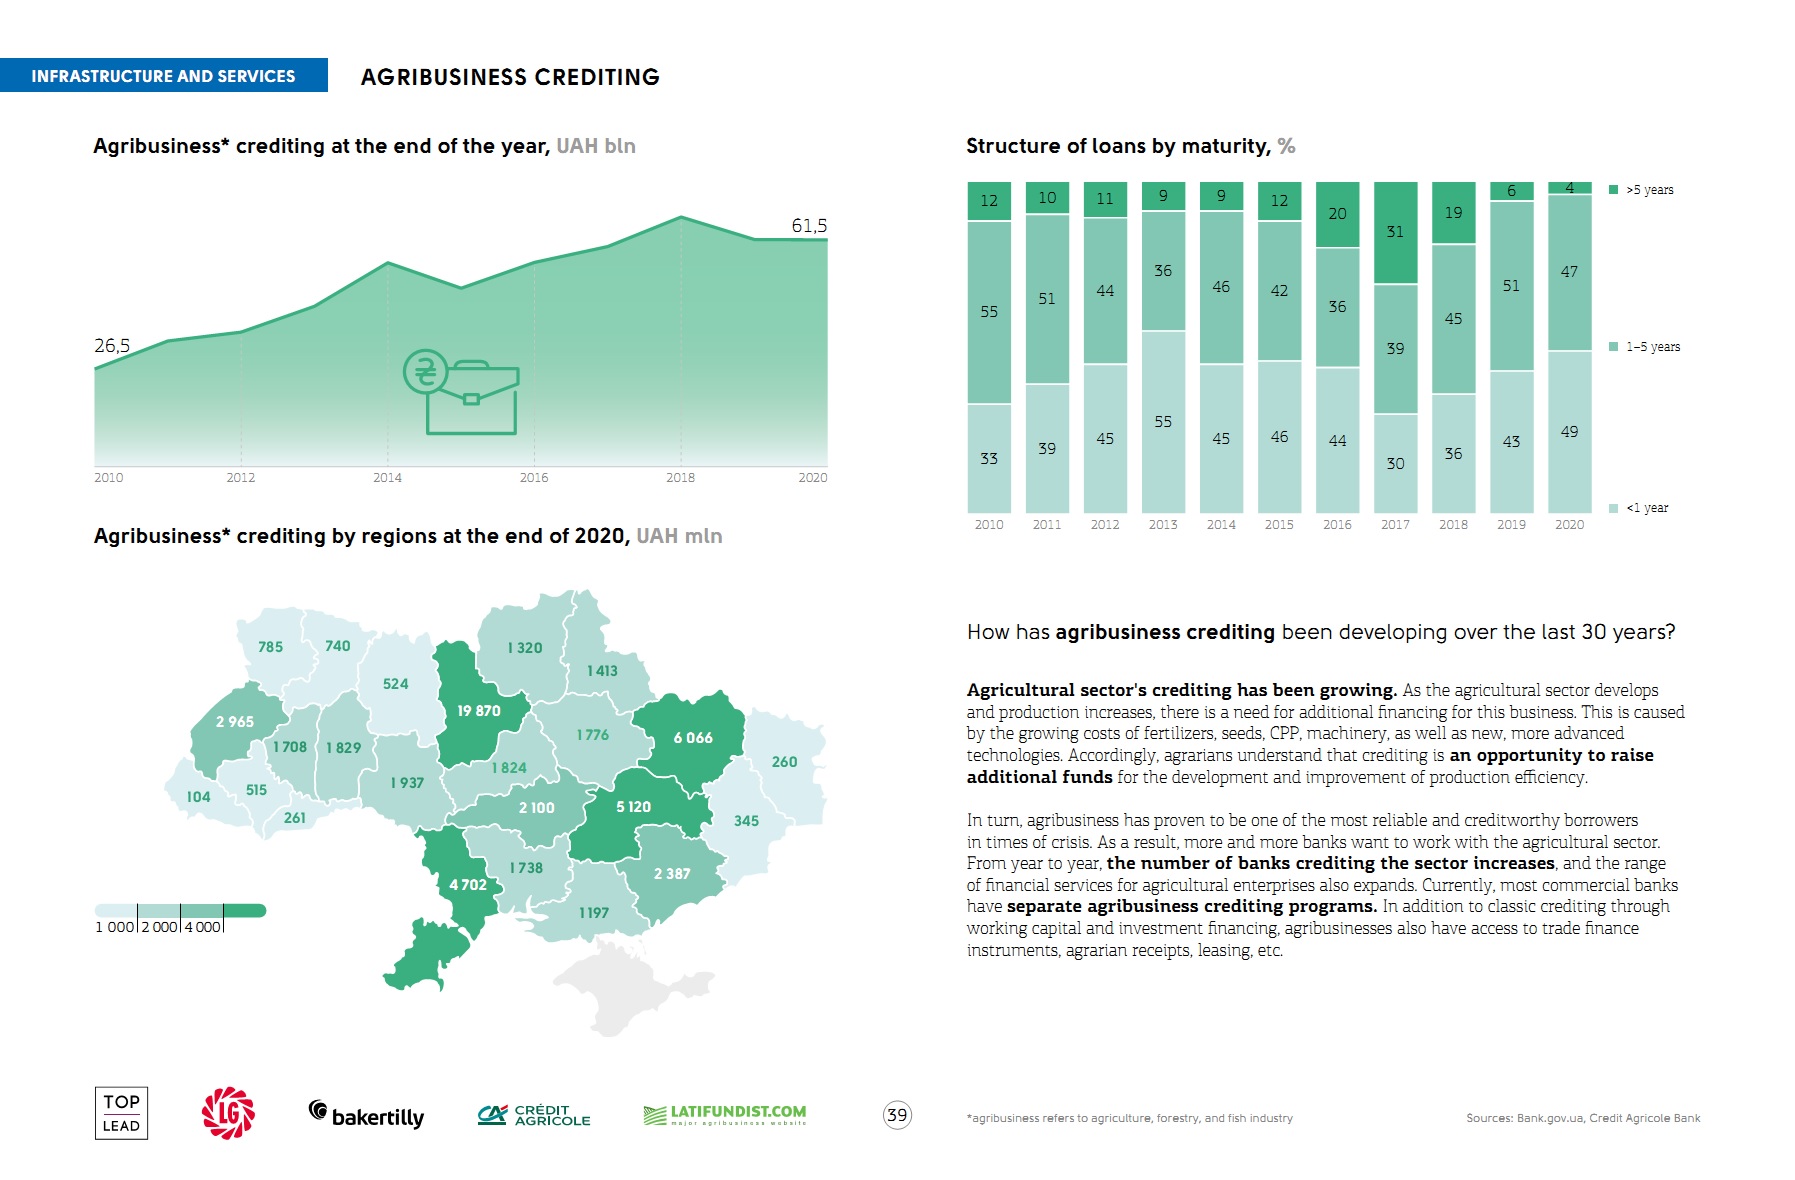 Agribusiness crediting in Ukraine (click for higher resolution)